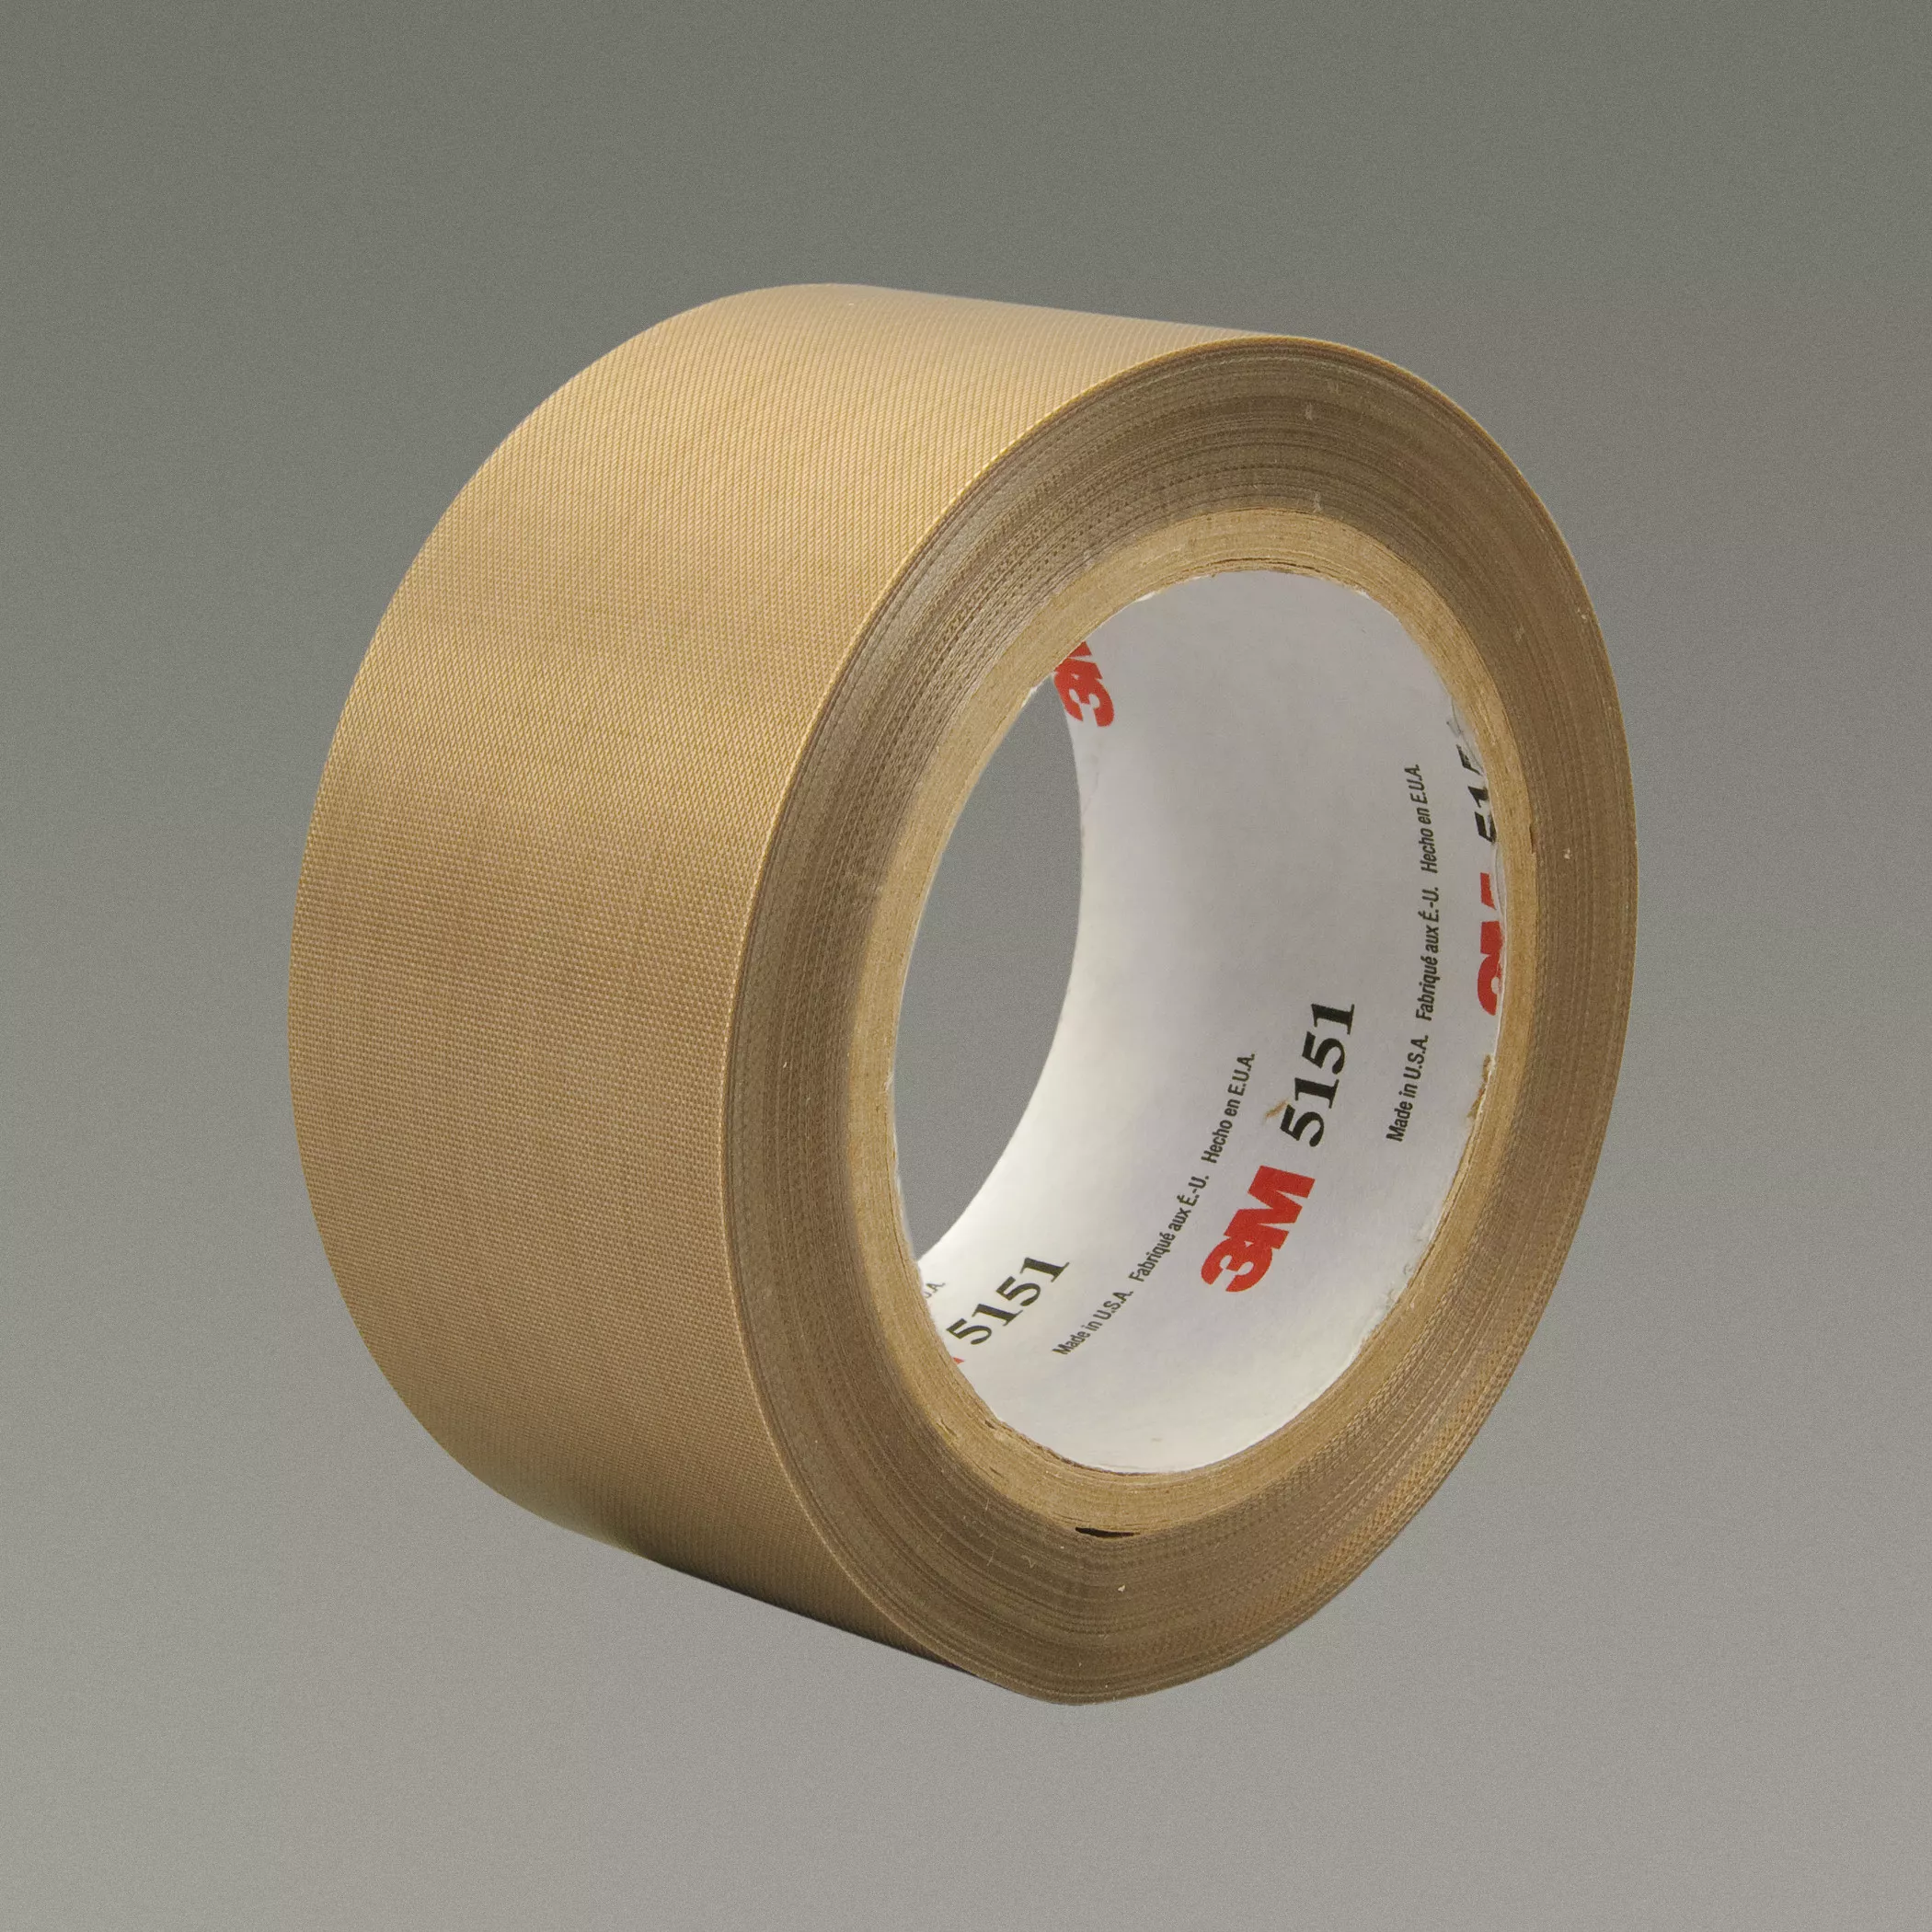 3M™ General Purpose PTFE Glass Cloth Tape 5151, Light Brown, 1 in x 36
yd, 5.3 mil, 36 Roll/Case